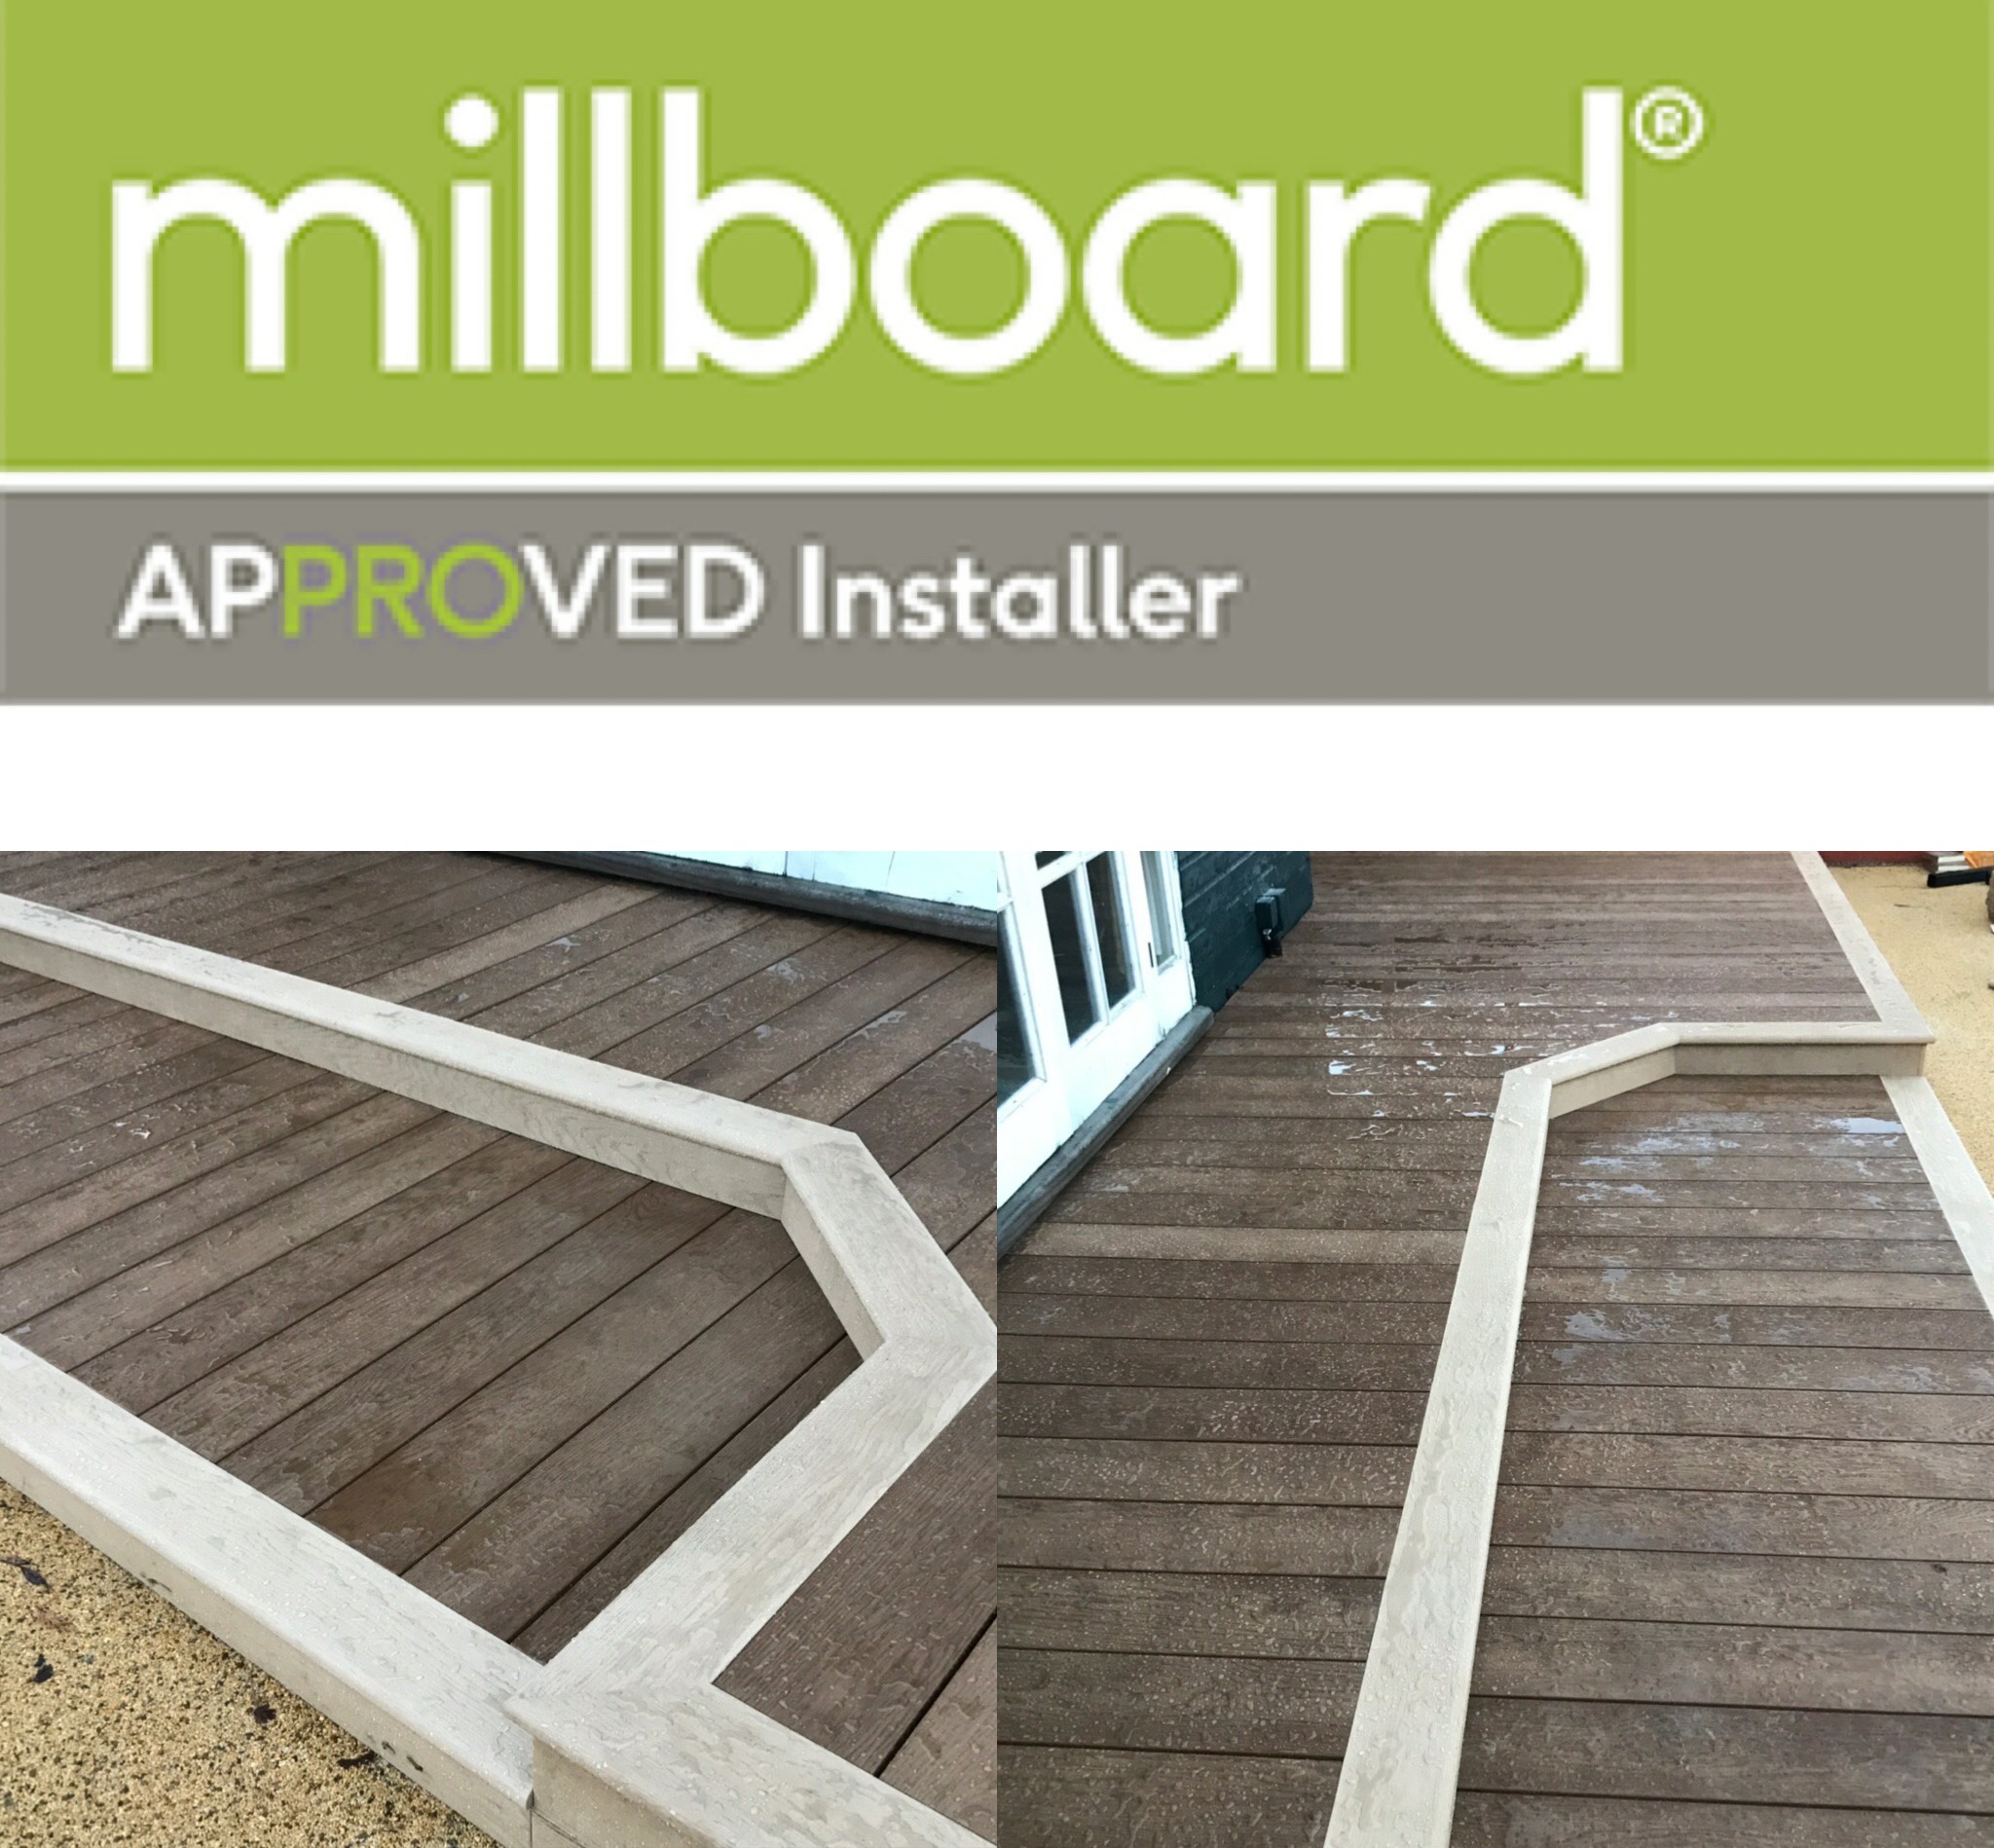 Millboard combines the natural beauty of real timber with the high performance of a unique wood-free material. The scratch and stain resistant properties of the product keep it looking as good as the day it was installed. Millboard will not rot and does not react to differences in temperature. Combined with a composite frame it will carry a warranty of 25 Years.